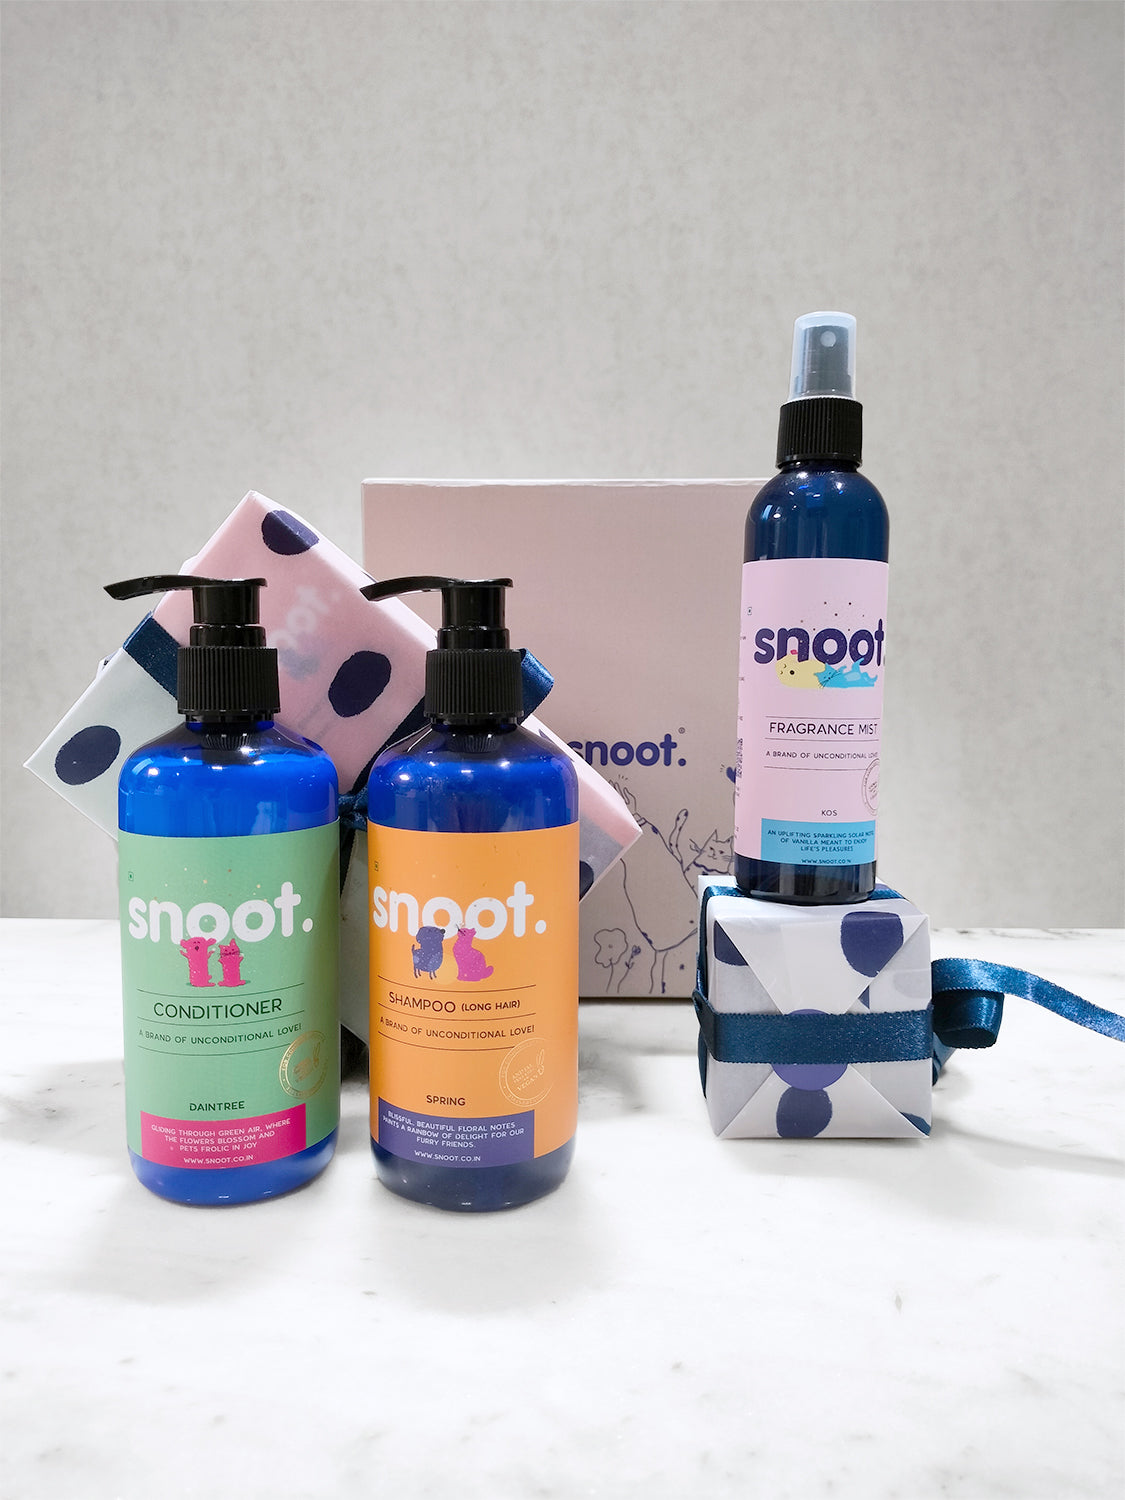 Gift set for pets, dogs, and cats featuring a pet shampoo, conditioner, and fragrance mist